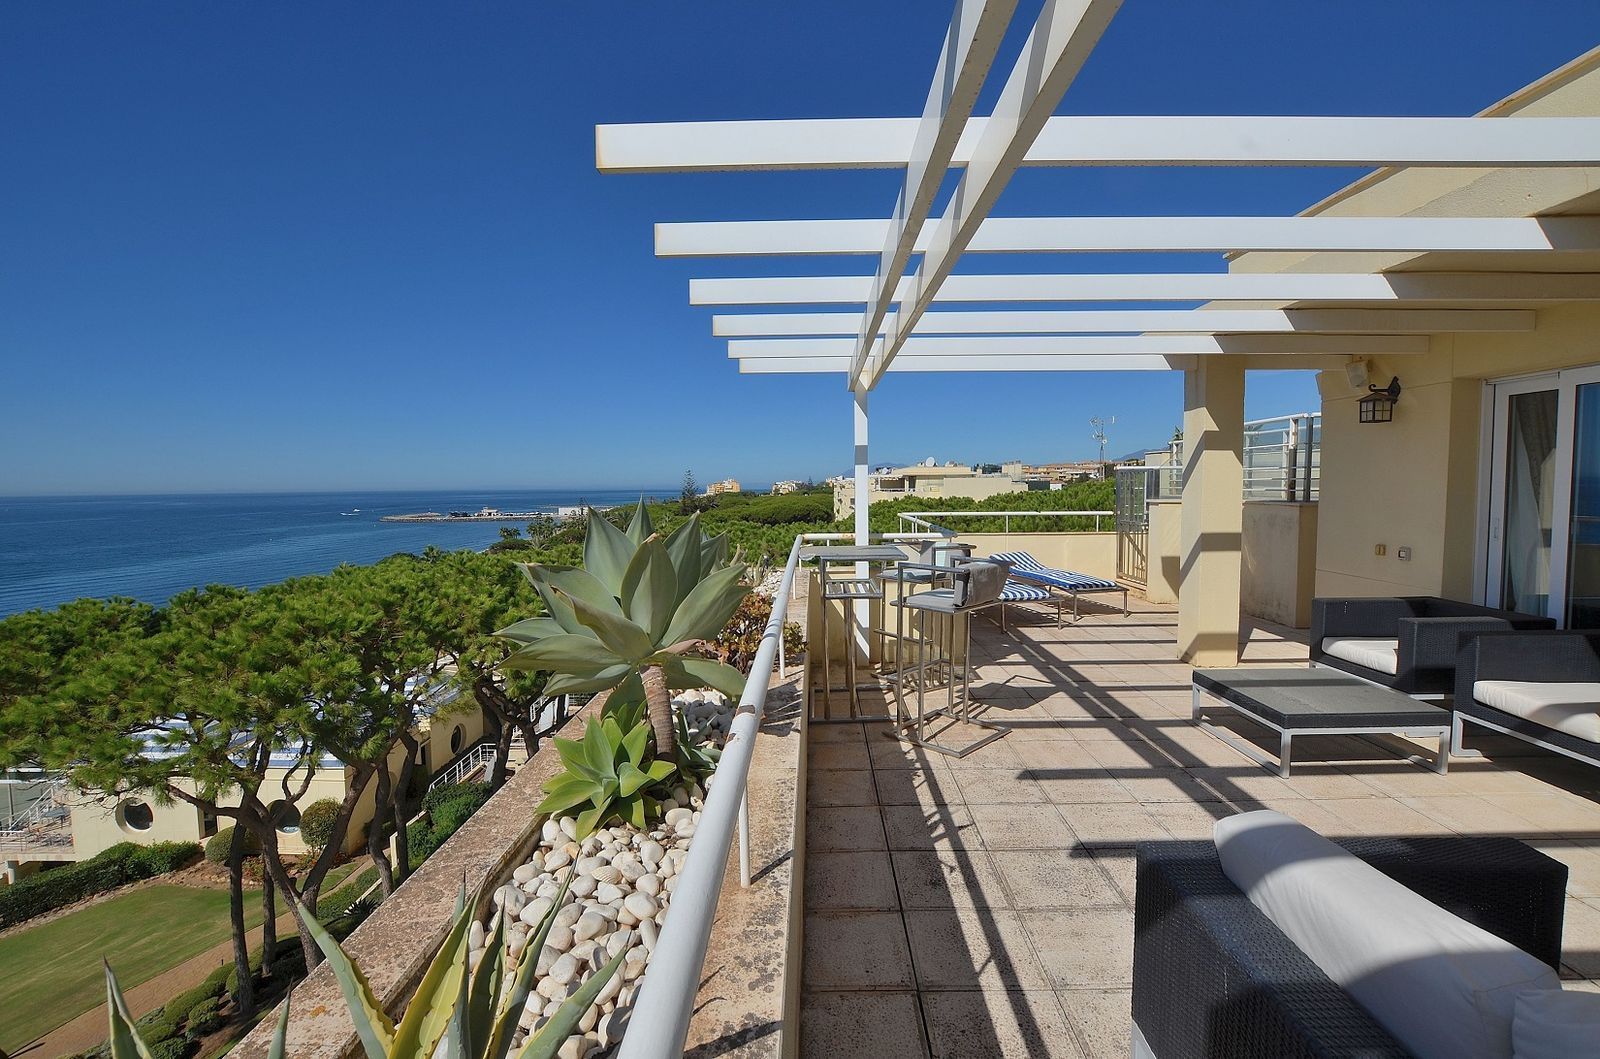 Penthouse in Cabopino, Marbella